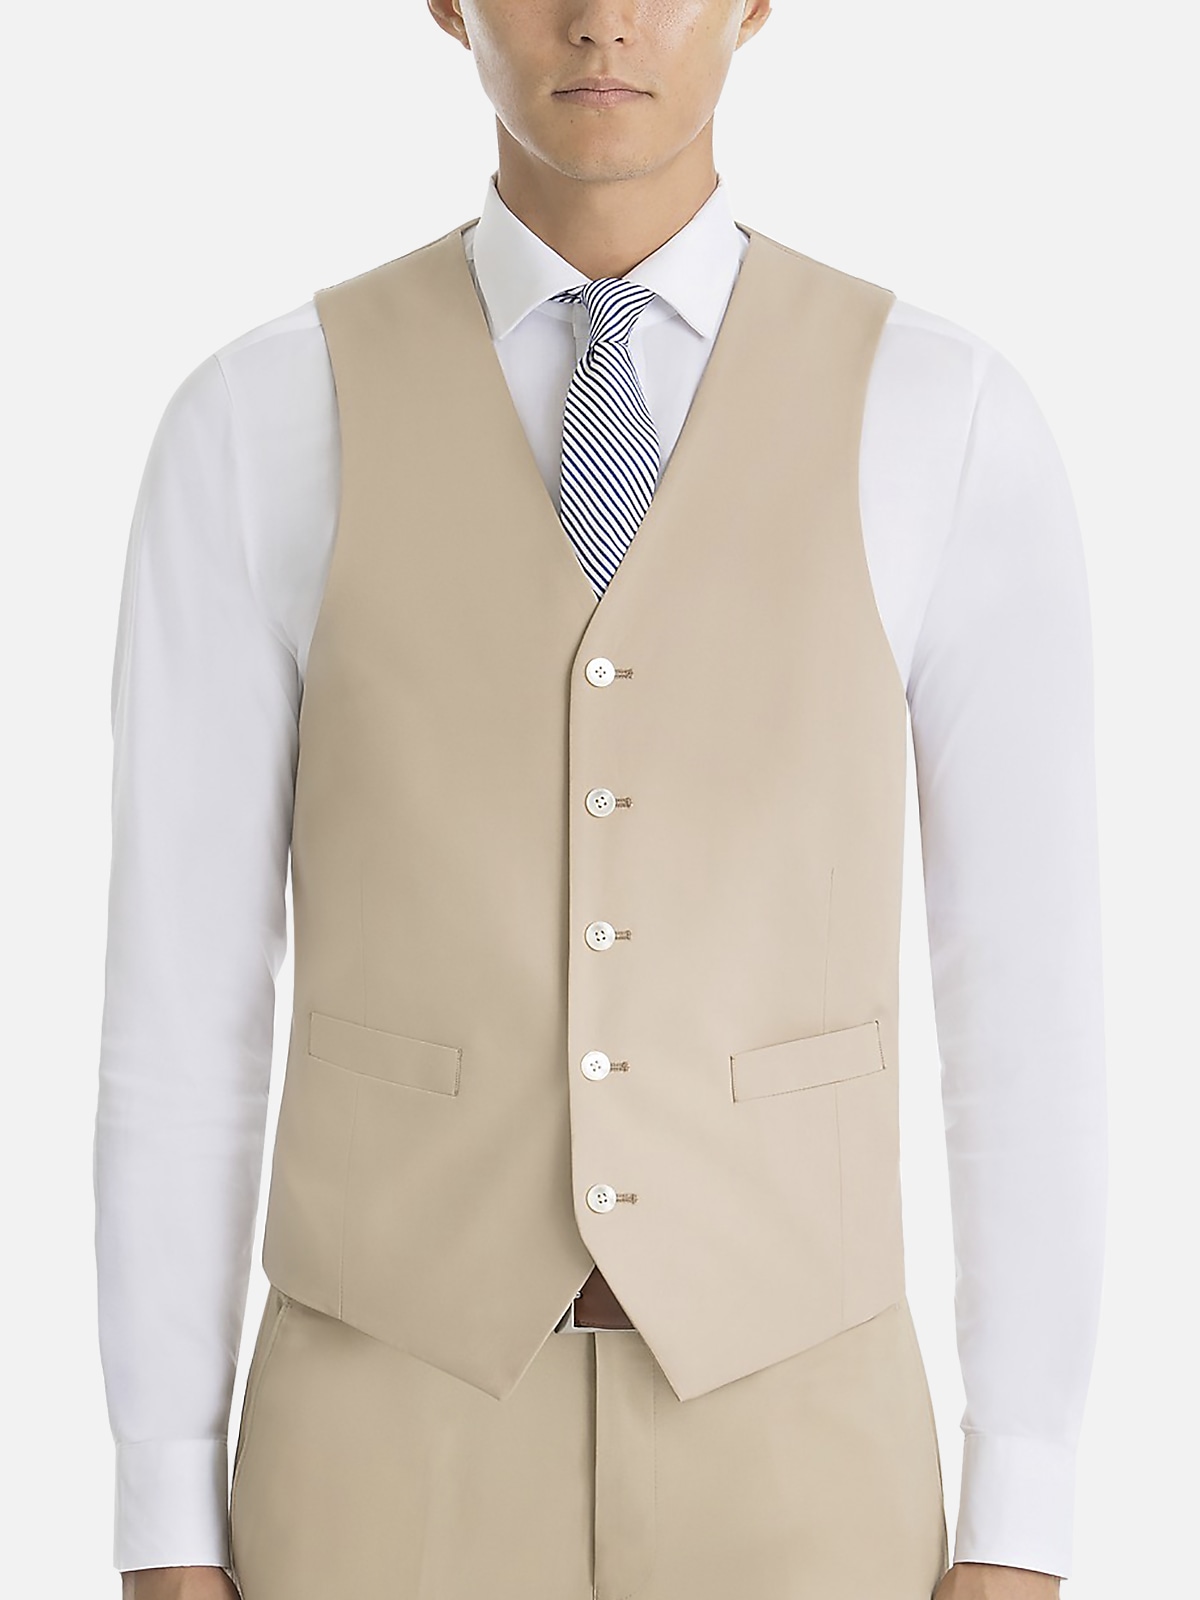 https://image.menswearhouse.com/is/image/TMW/TMW_3VF4_05_LAUREN_BY_RALPH_LAUREN_SUIT_SEPARATE_VESTS_TAN_SOLID_MAIN?imPolicy=pdp-zoom-mob